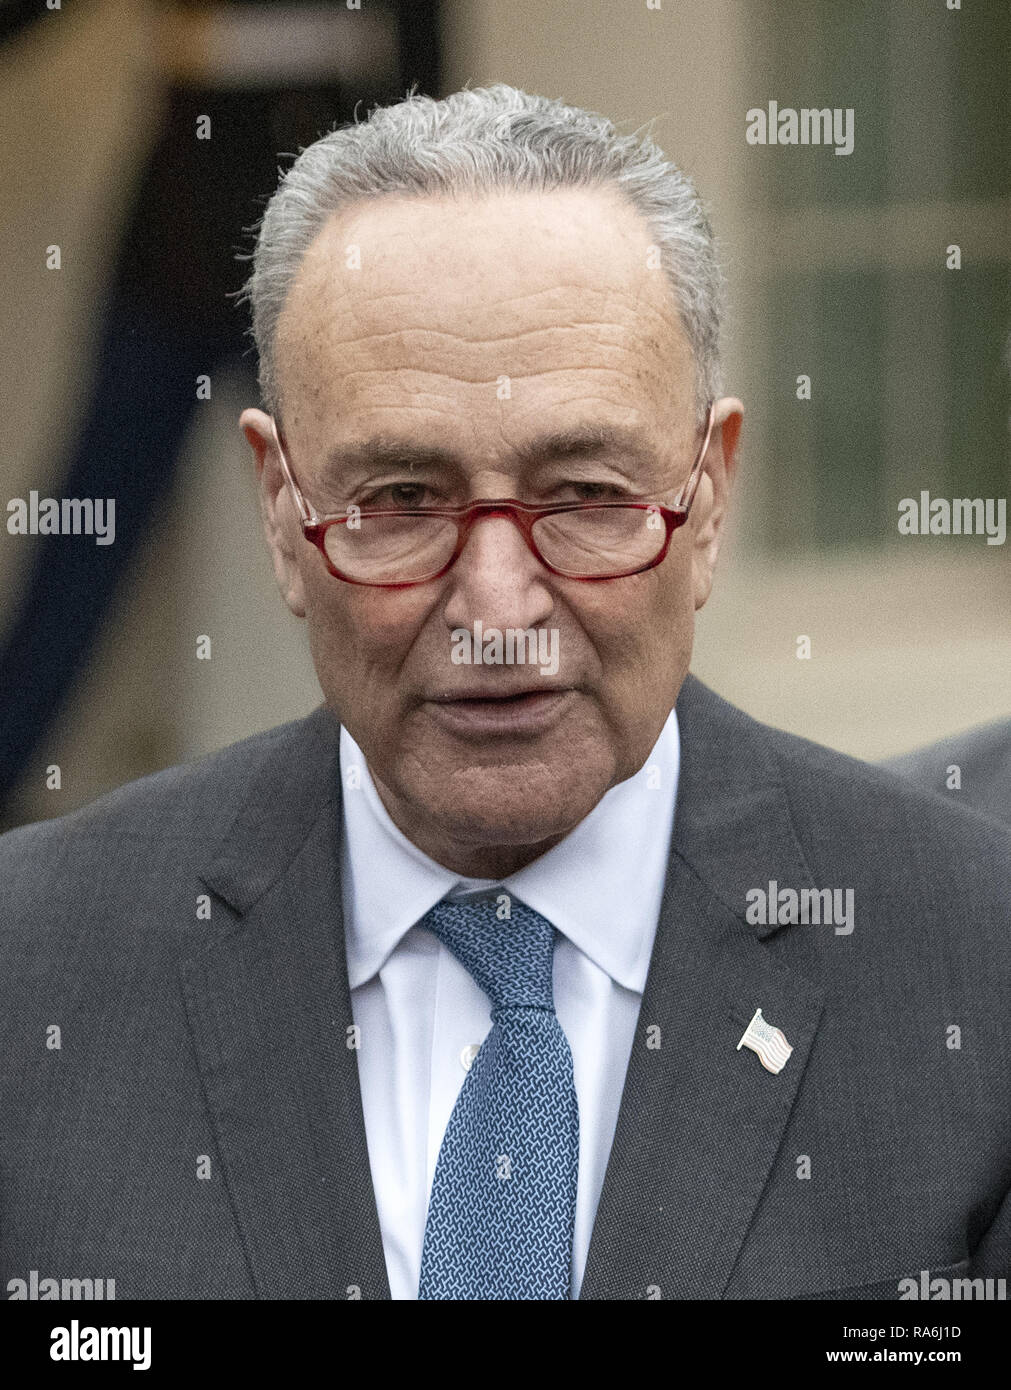 Washington, DC, USA. 2nd Jan, 2019. United States Senate Minority Leader Chuck Schumer (Democrat of New York) meets reporters at the White House after meeting with US President Donald J. Trump on border security and reopening the federal government at the White House in Washington, DC on Wednesday, January 2, 2018 Credit: ZUMA Press, Inc./Alamy Live News Stock Photo